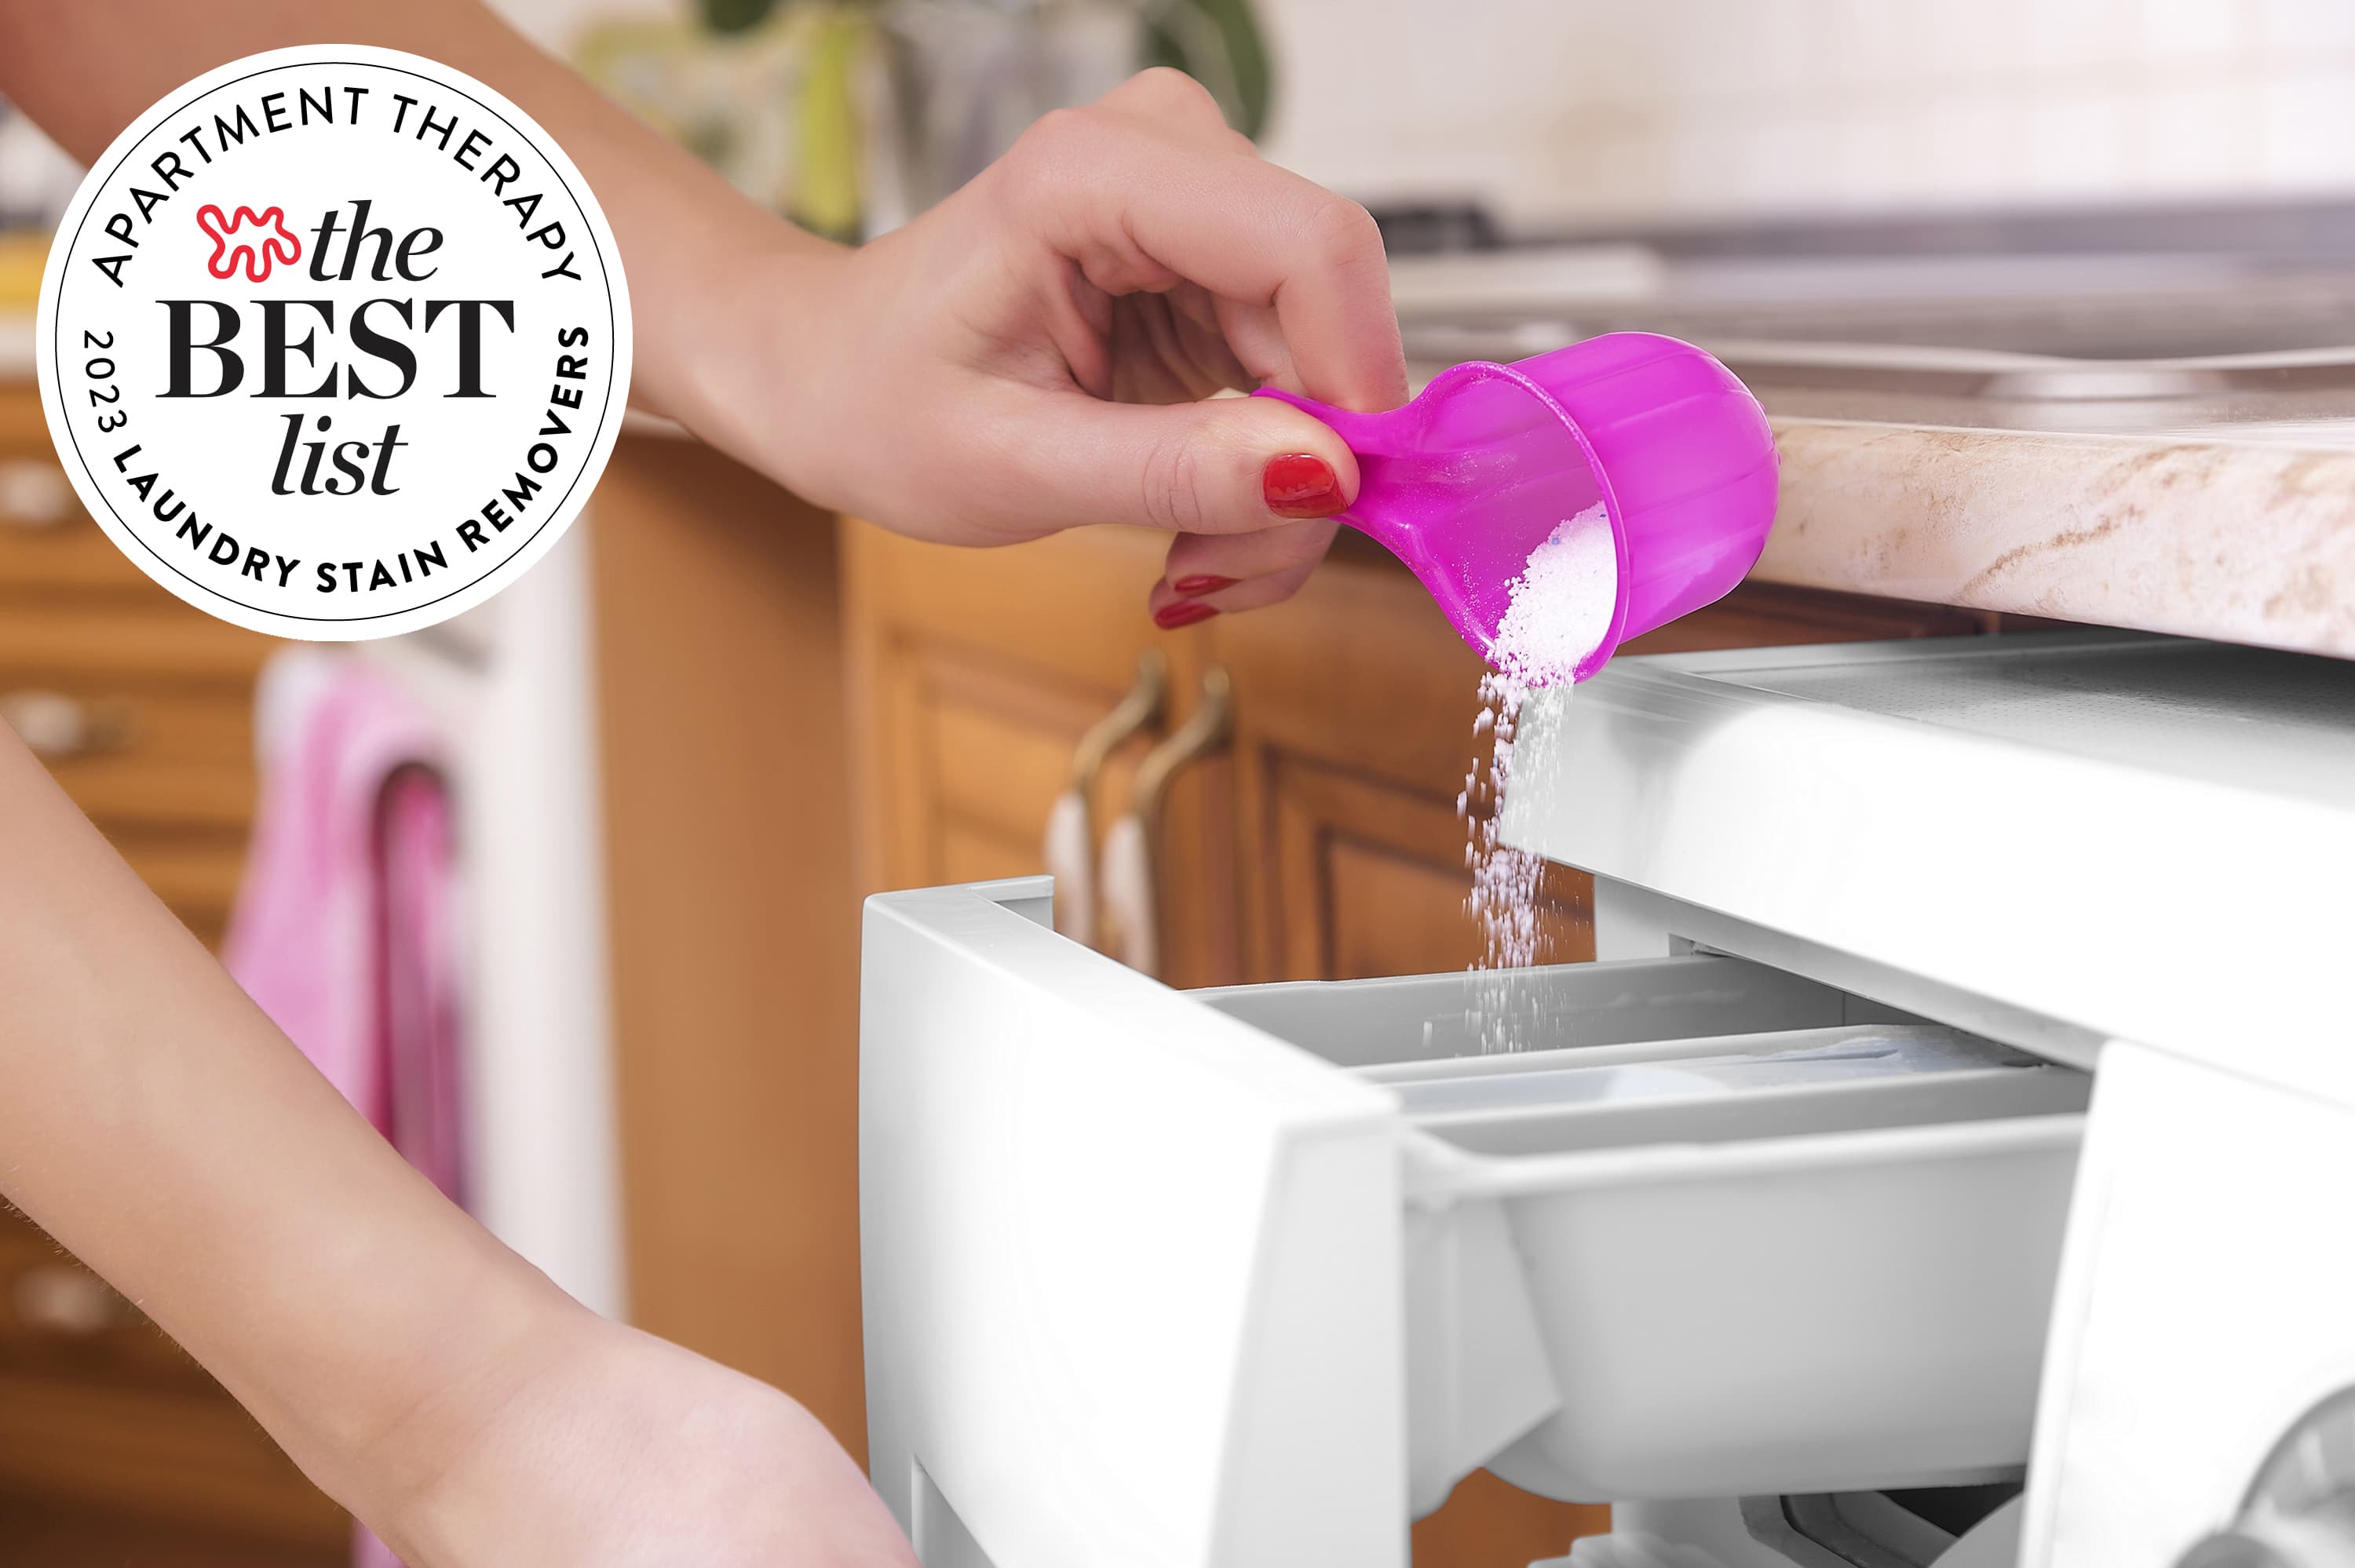 How to Remove Ink from Clothes: The 8 Best Cleaners